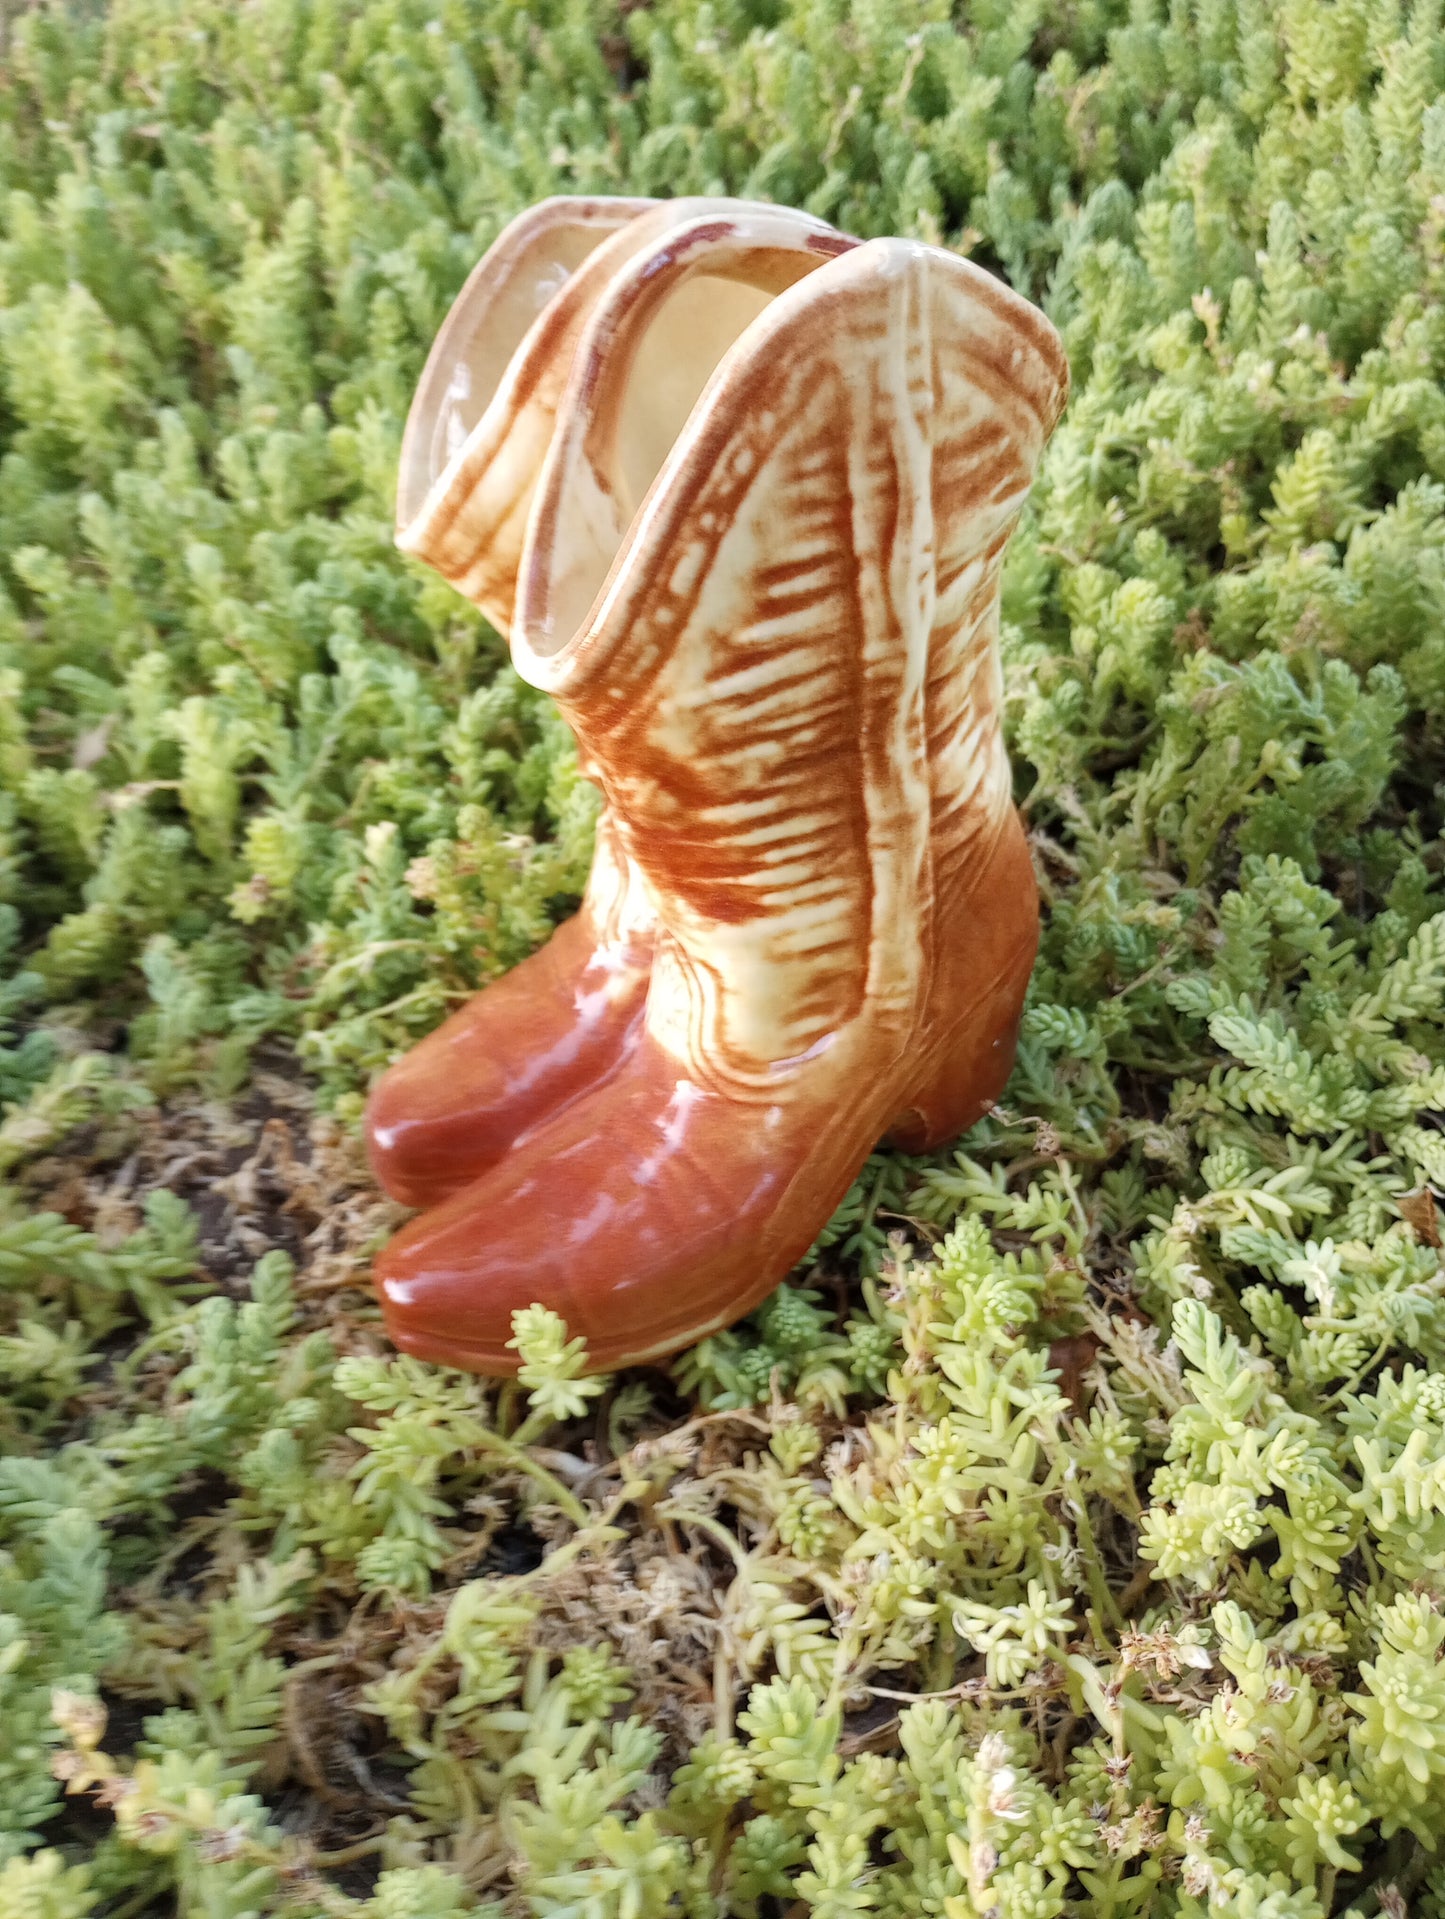 McCoy Pottery Pair of Boots Vase